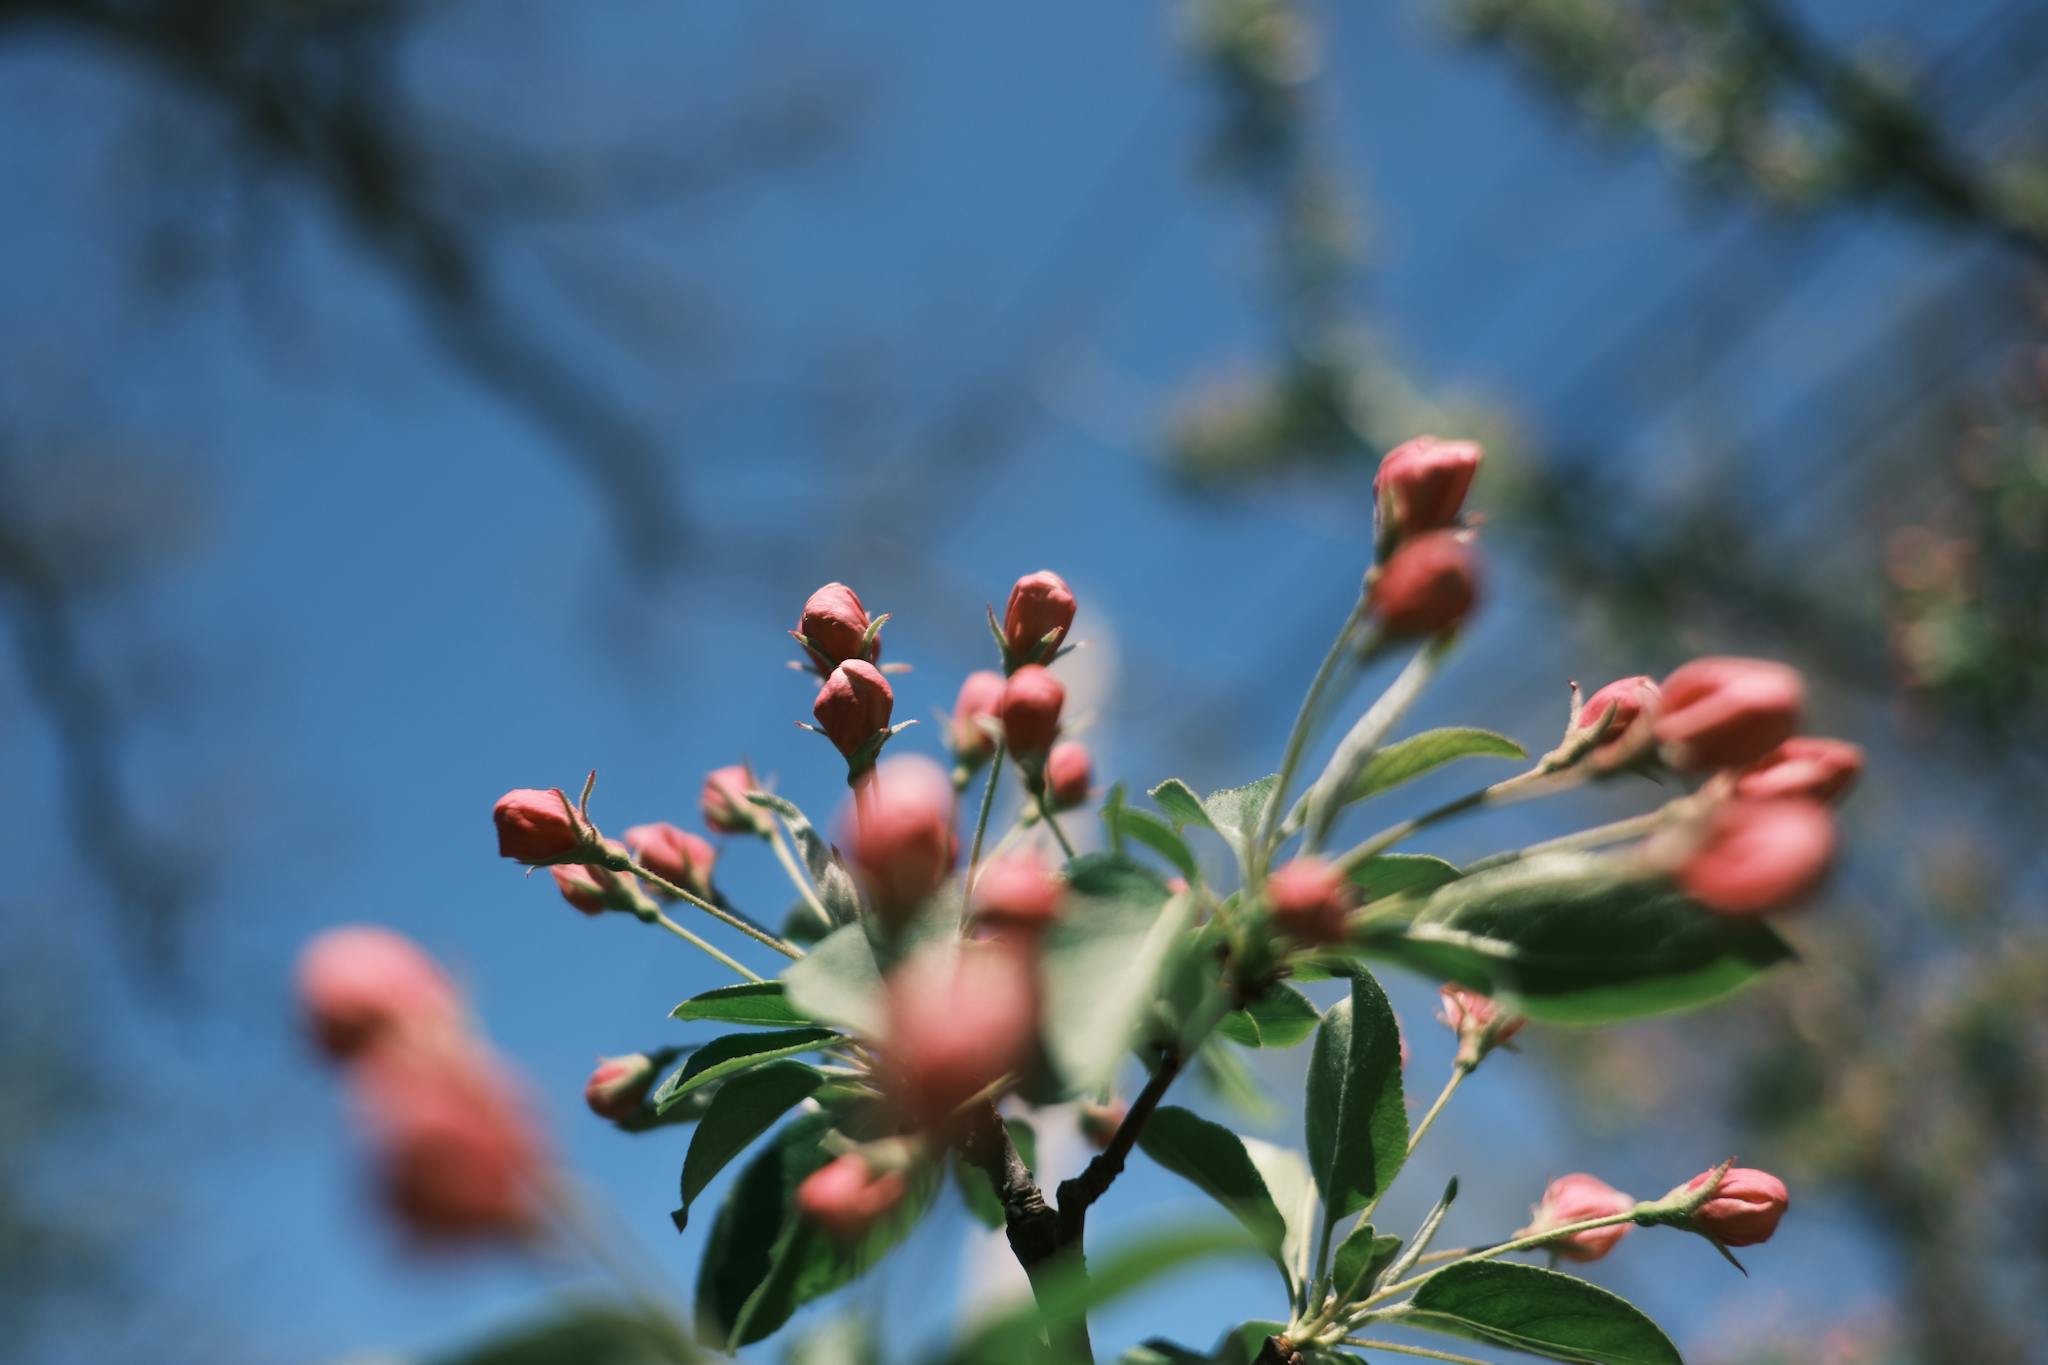 Budding pink flowers on a branch with a clear blue sky in the background